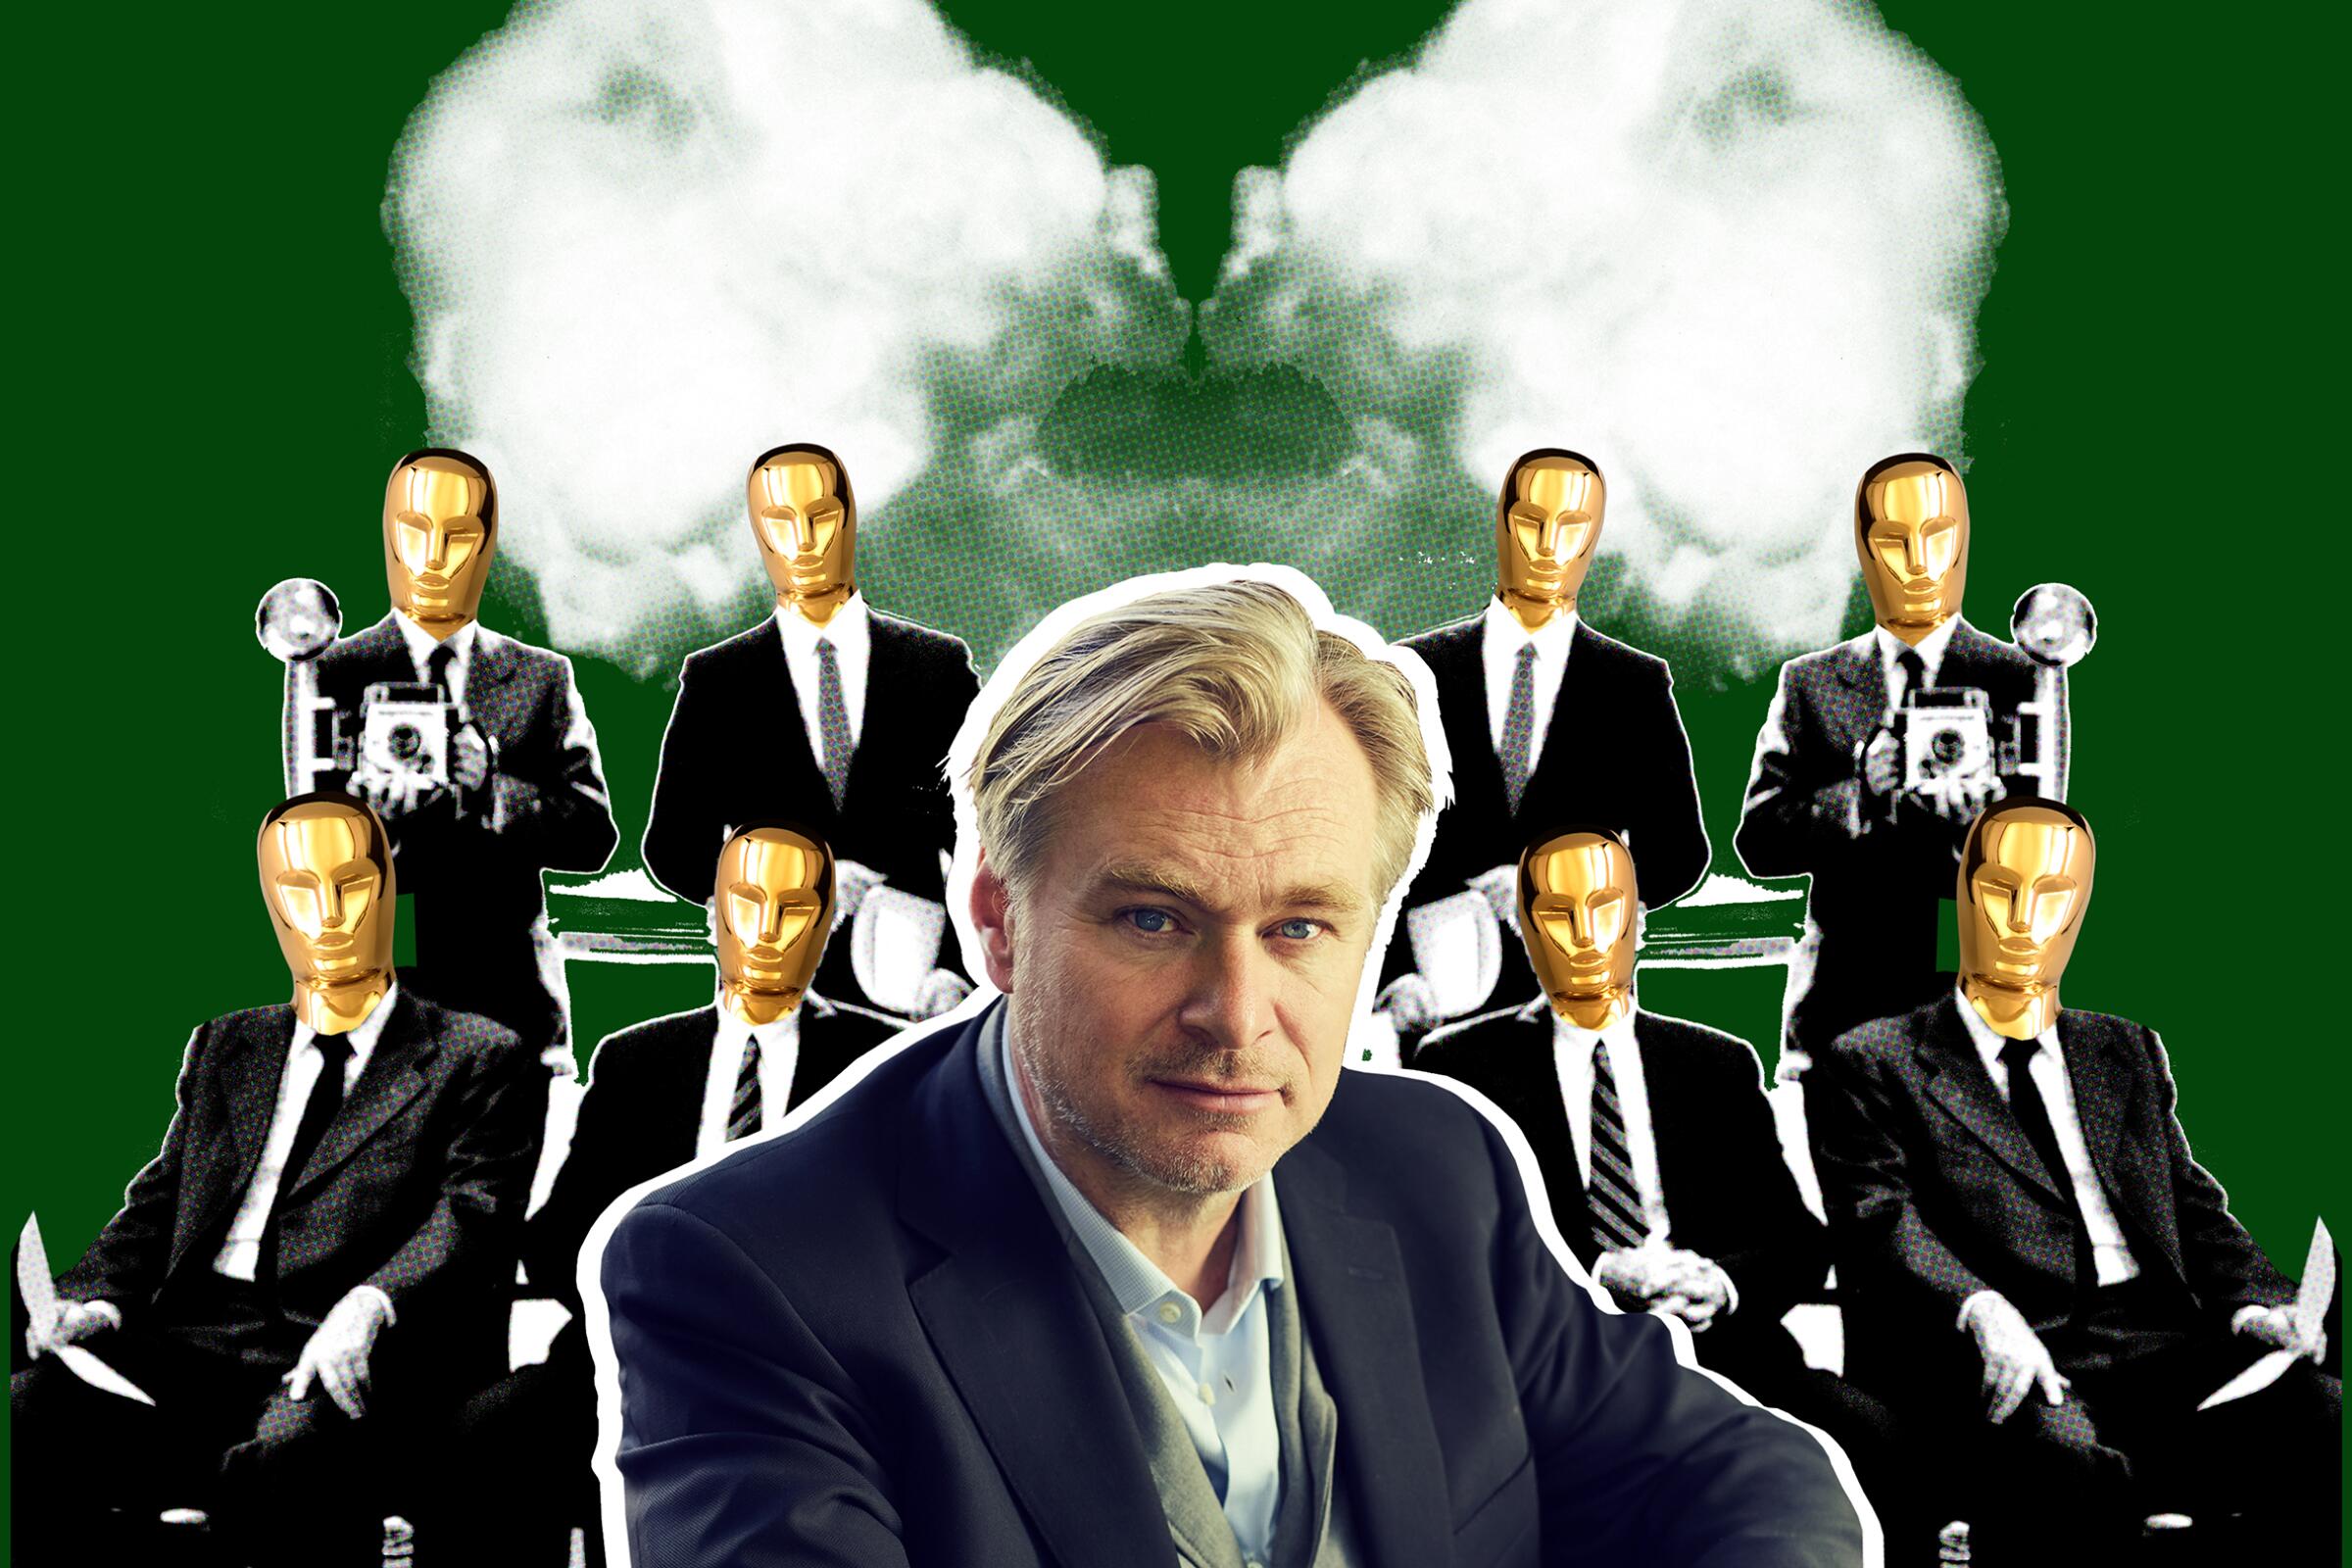 An illustration shows Christopher Nolan in front of black-suited men with Oscar faces.